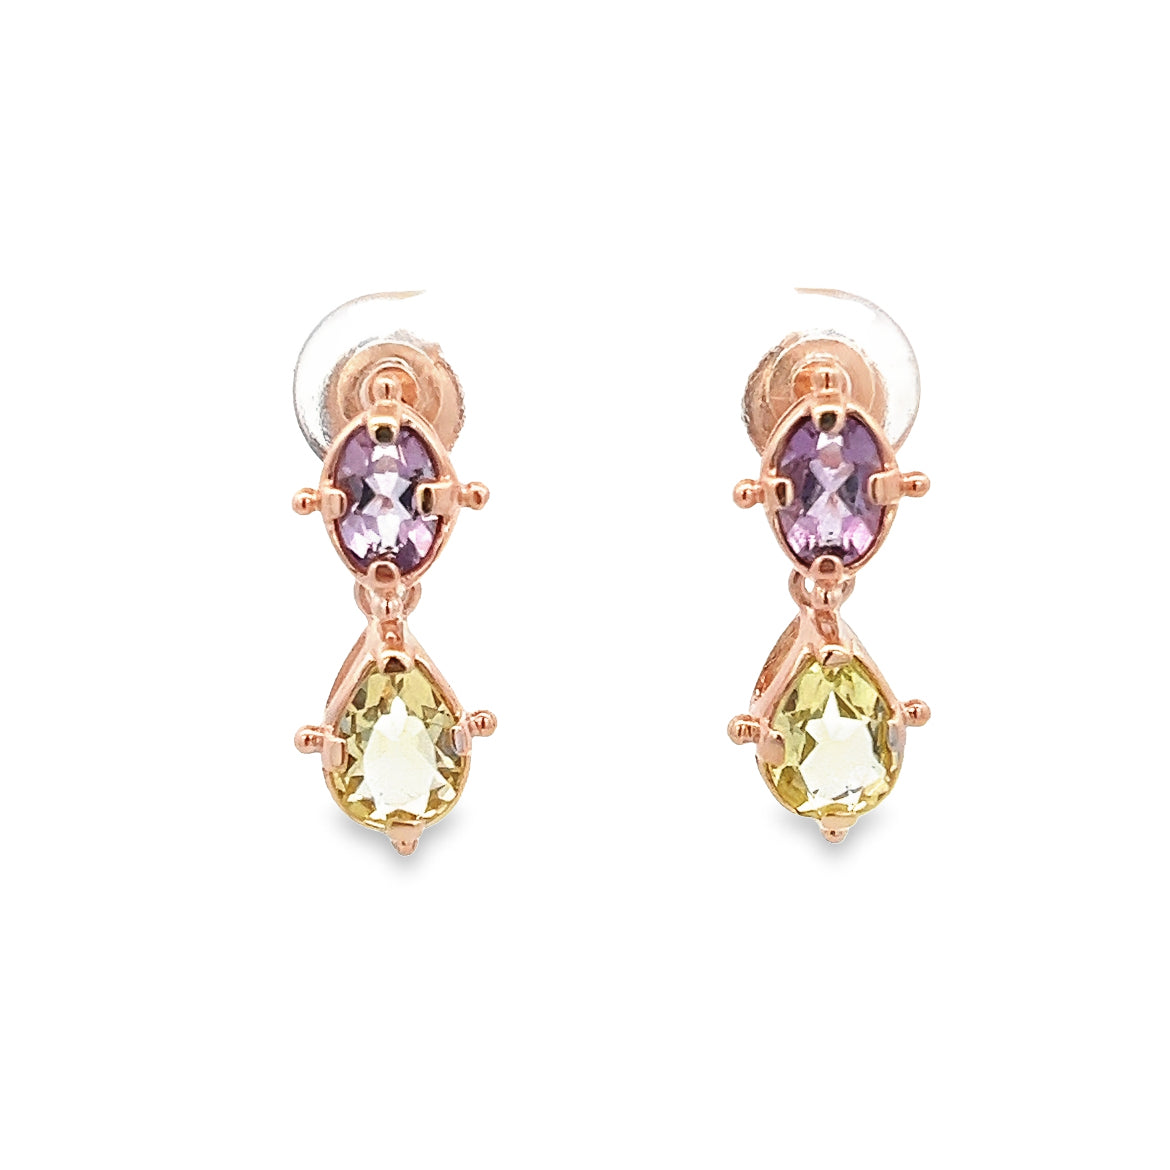 925 SILVER ROSE GOLD EARRINGS WITH OVAL CUT AMETHYST AND PEAR CUT LEMON QUARTZ